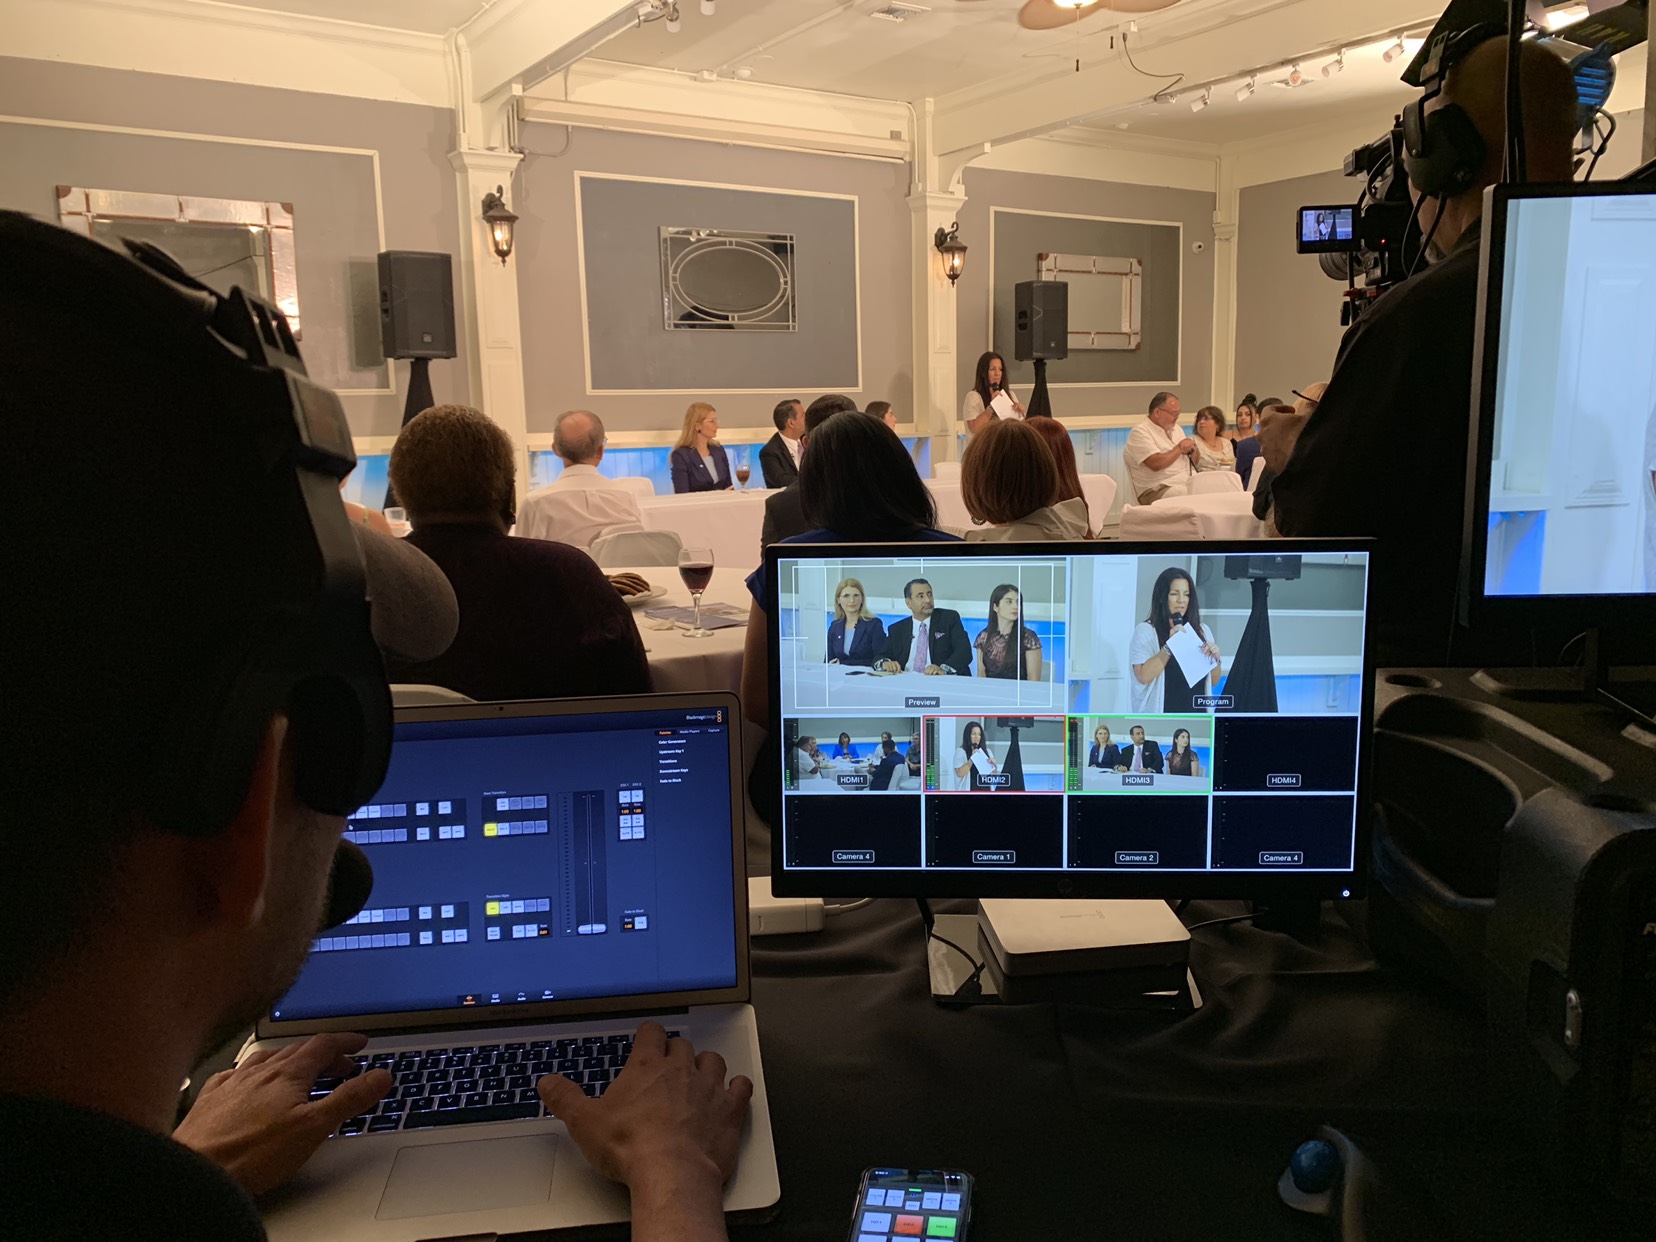 Vienna live webcasting services